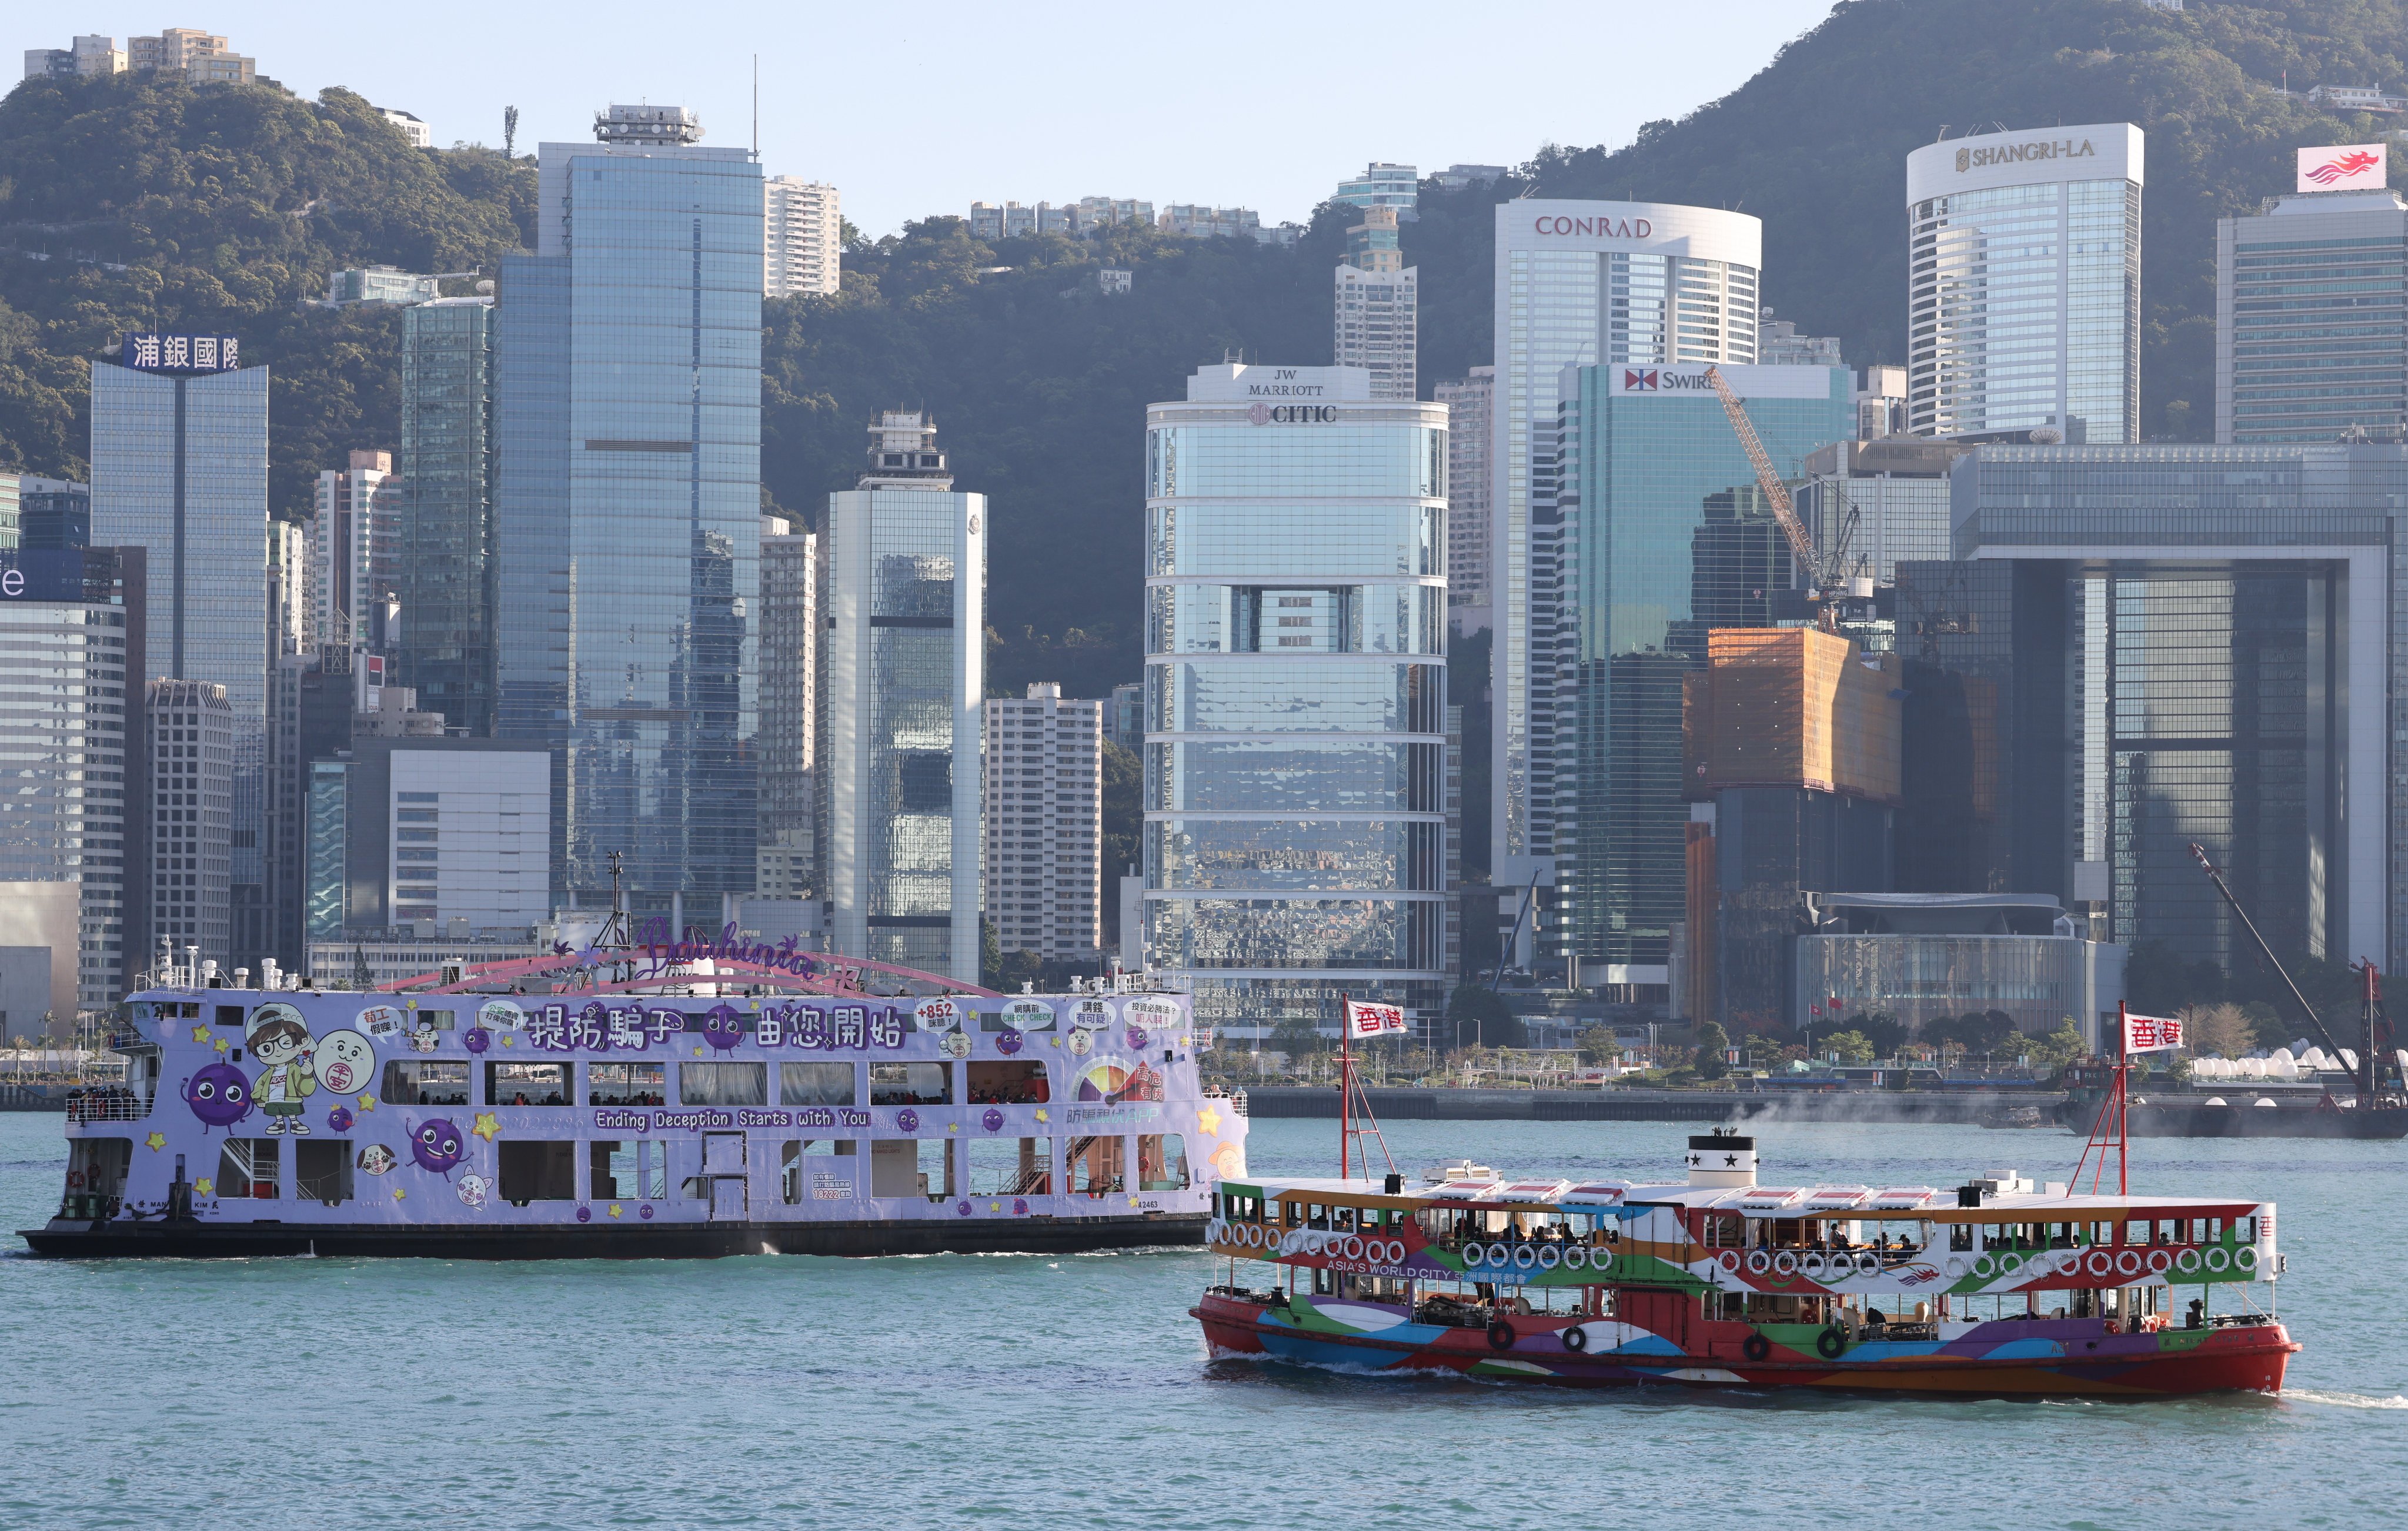 Hong Kong had more than 2,700 single-family offices at the end of last year, according to Deloitte. Photo: Jelly Tse